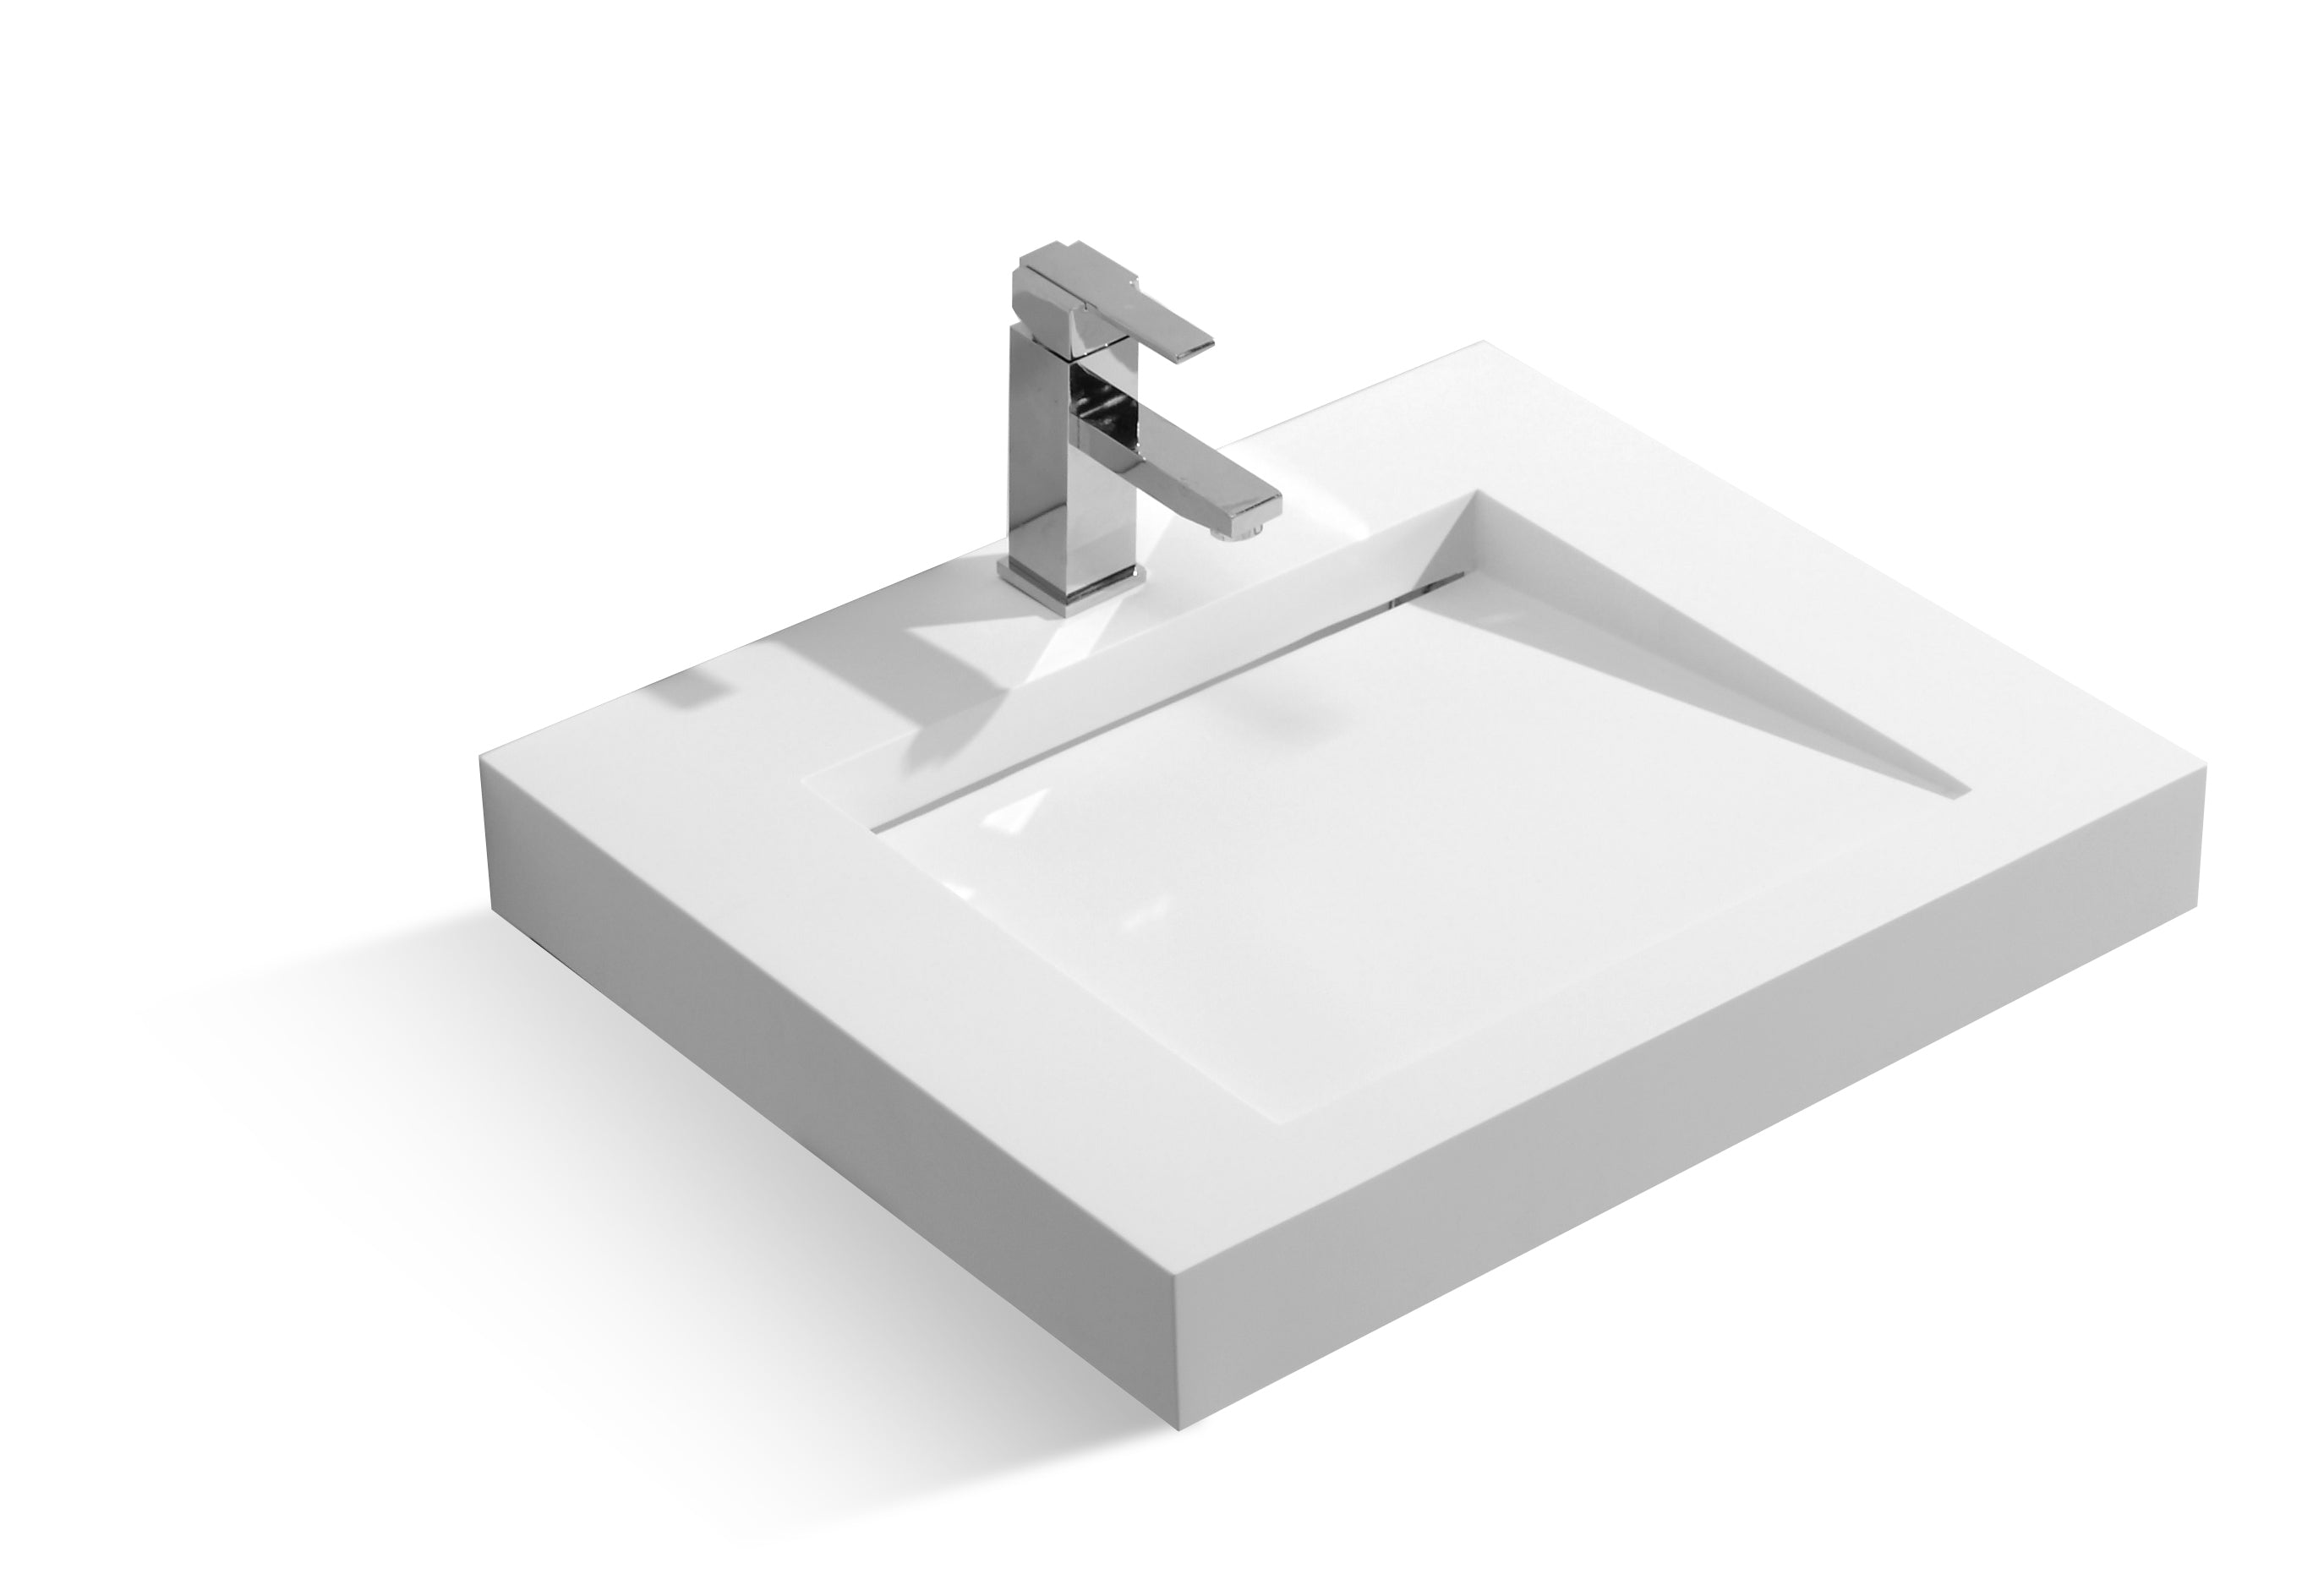 DAX Solid Surface Rectangle Single Bowl Top Mount Bathroom Sink,  23-1/4 x 19-5/16 x 3-1/8 Inches (DAX-AB-1330)